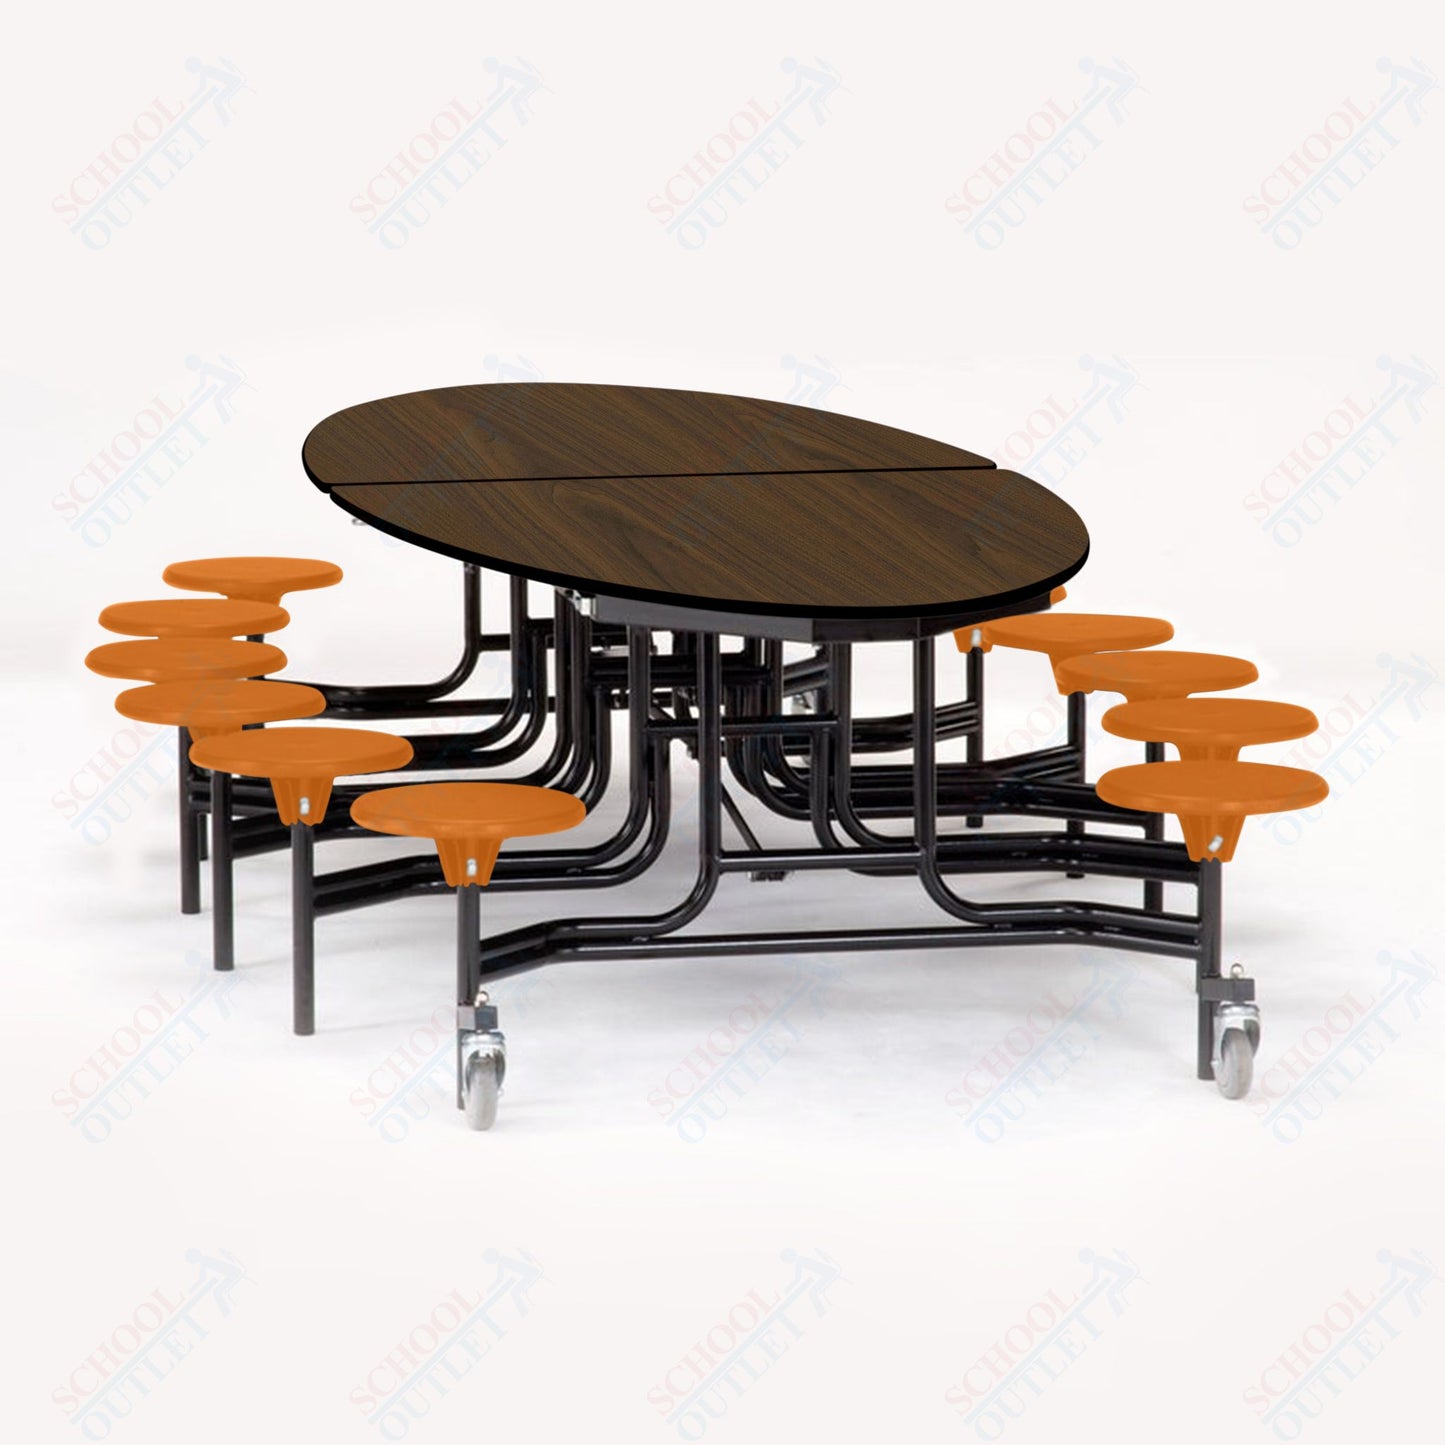 NPS 10' Elliptical Mobile Cafeteria Table - 12 Stools - Particleboard Core - T-Molding Edge - Chrome Frame